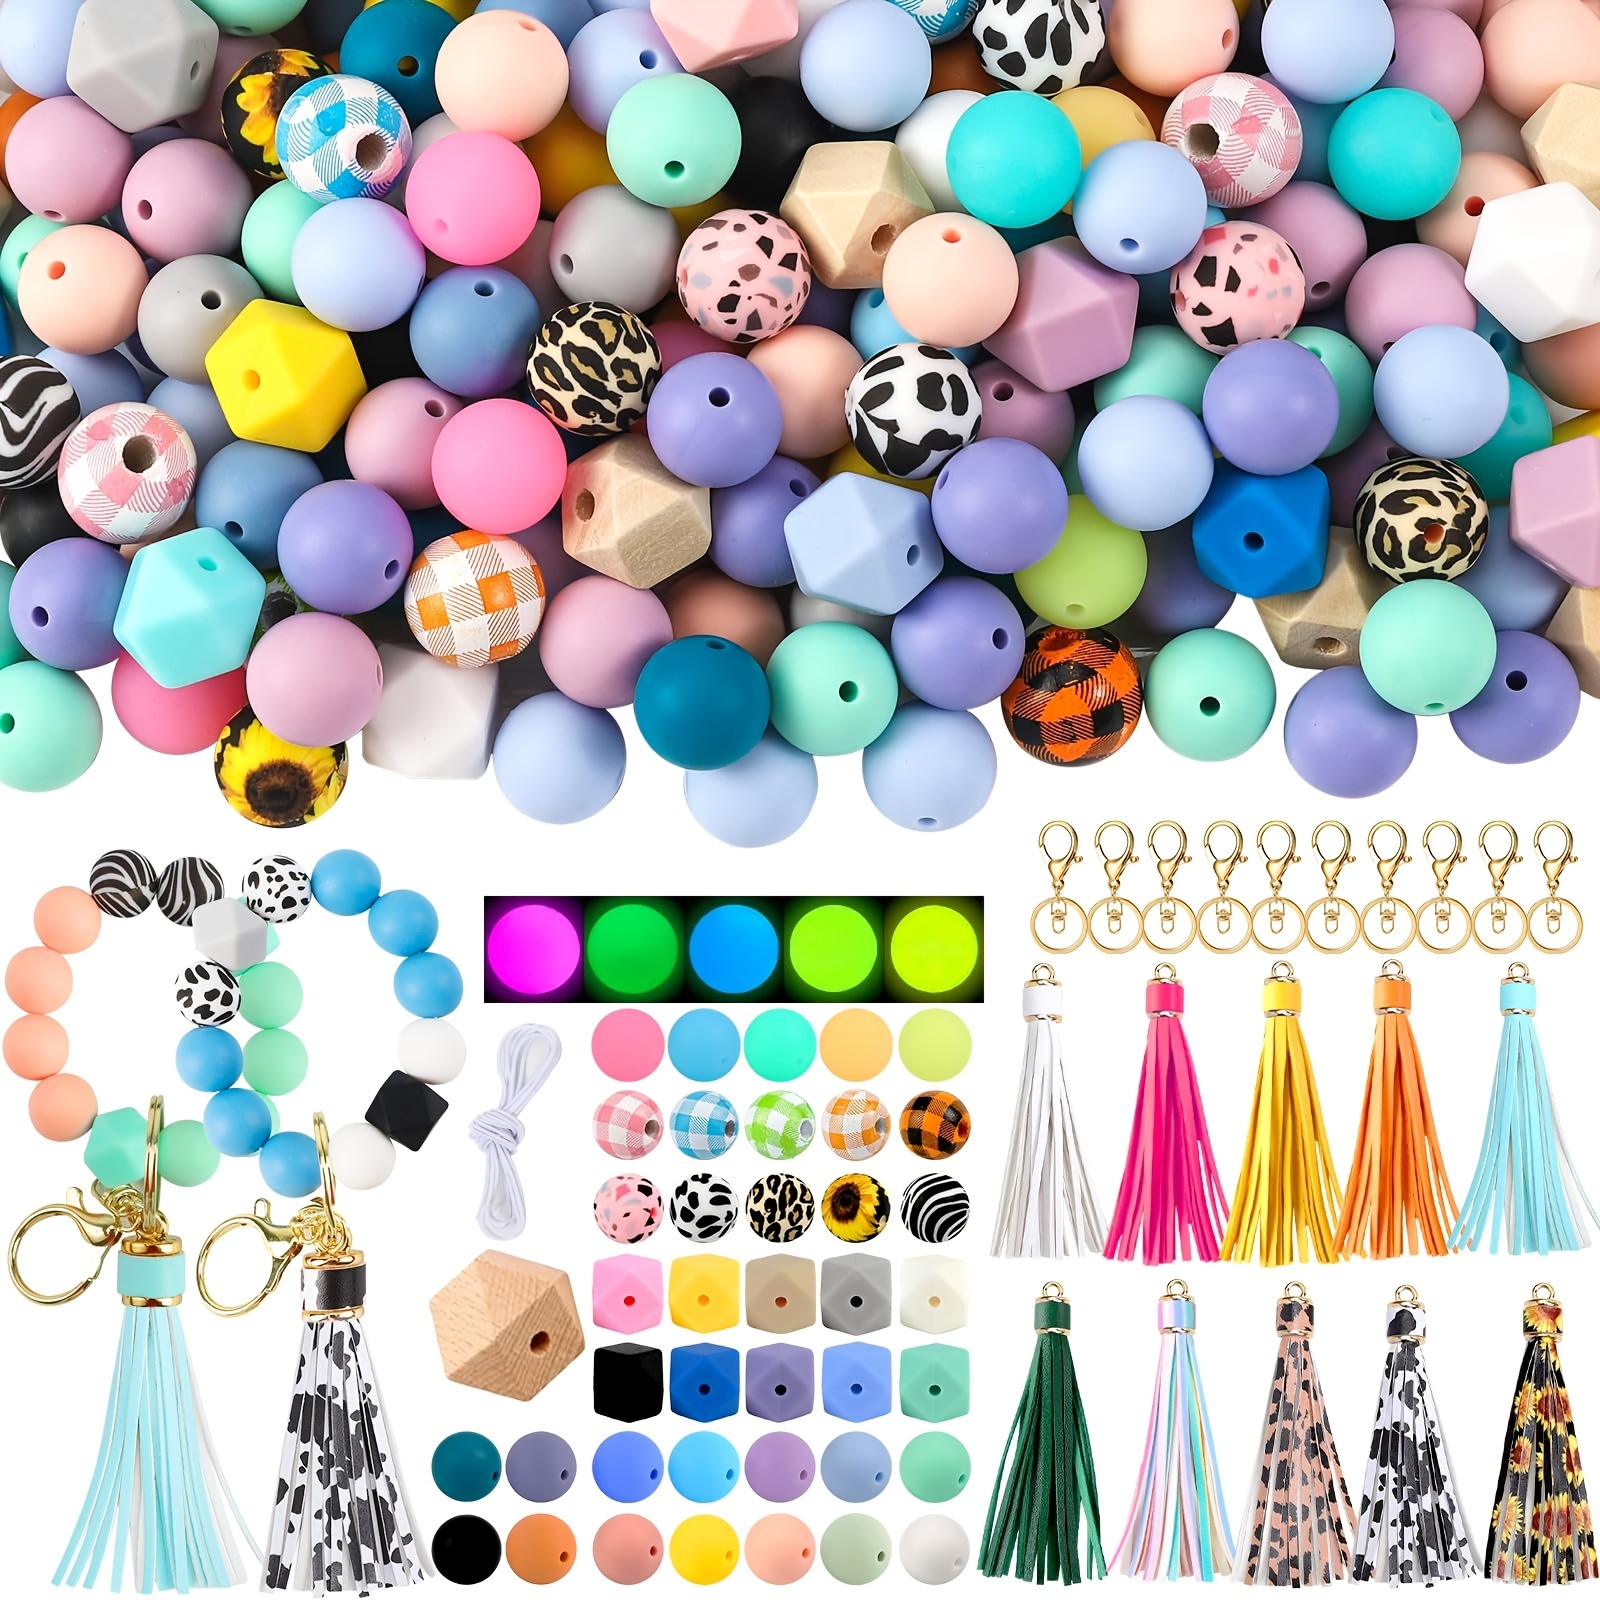 112 Pcs Silicone Beads, 15mm Round Silicone Beads and 17mm Polygonal  Silicone Beads for Keychain Making, Rubber Silicone Loose Beads Bulk for  Necklace